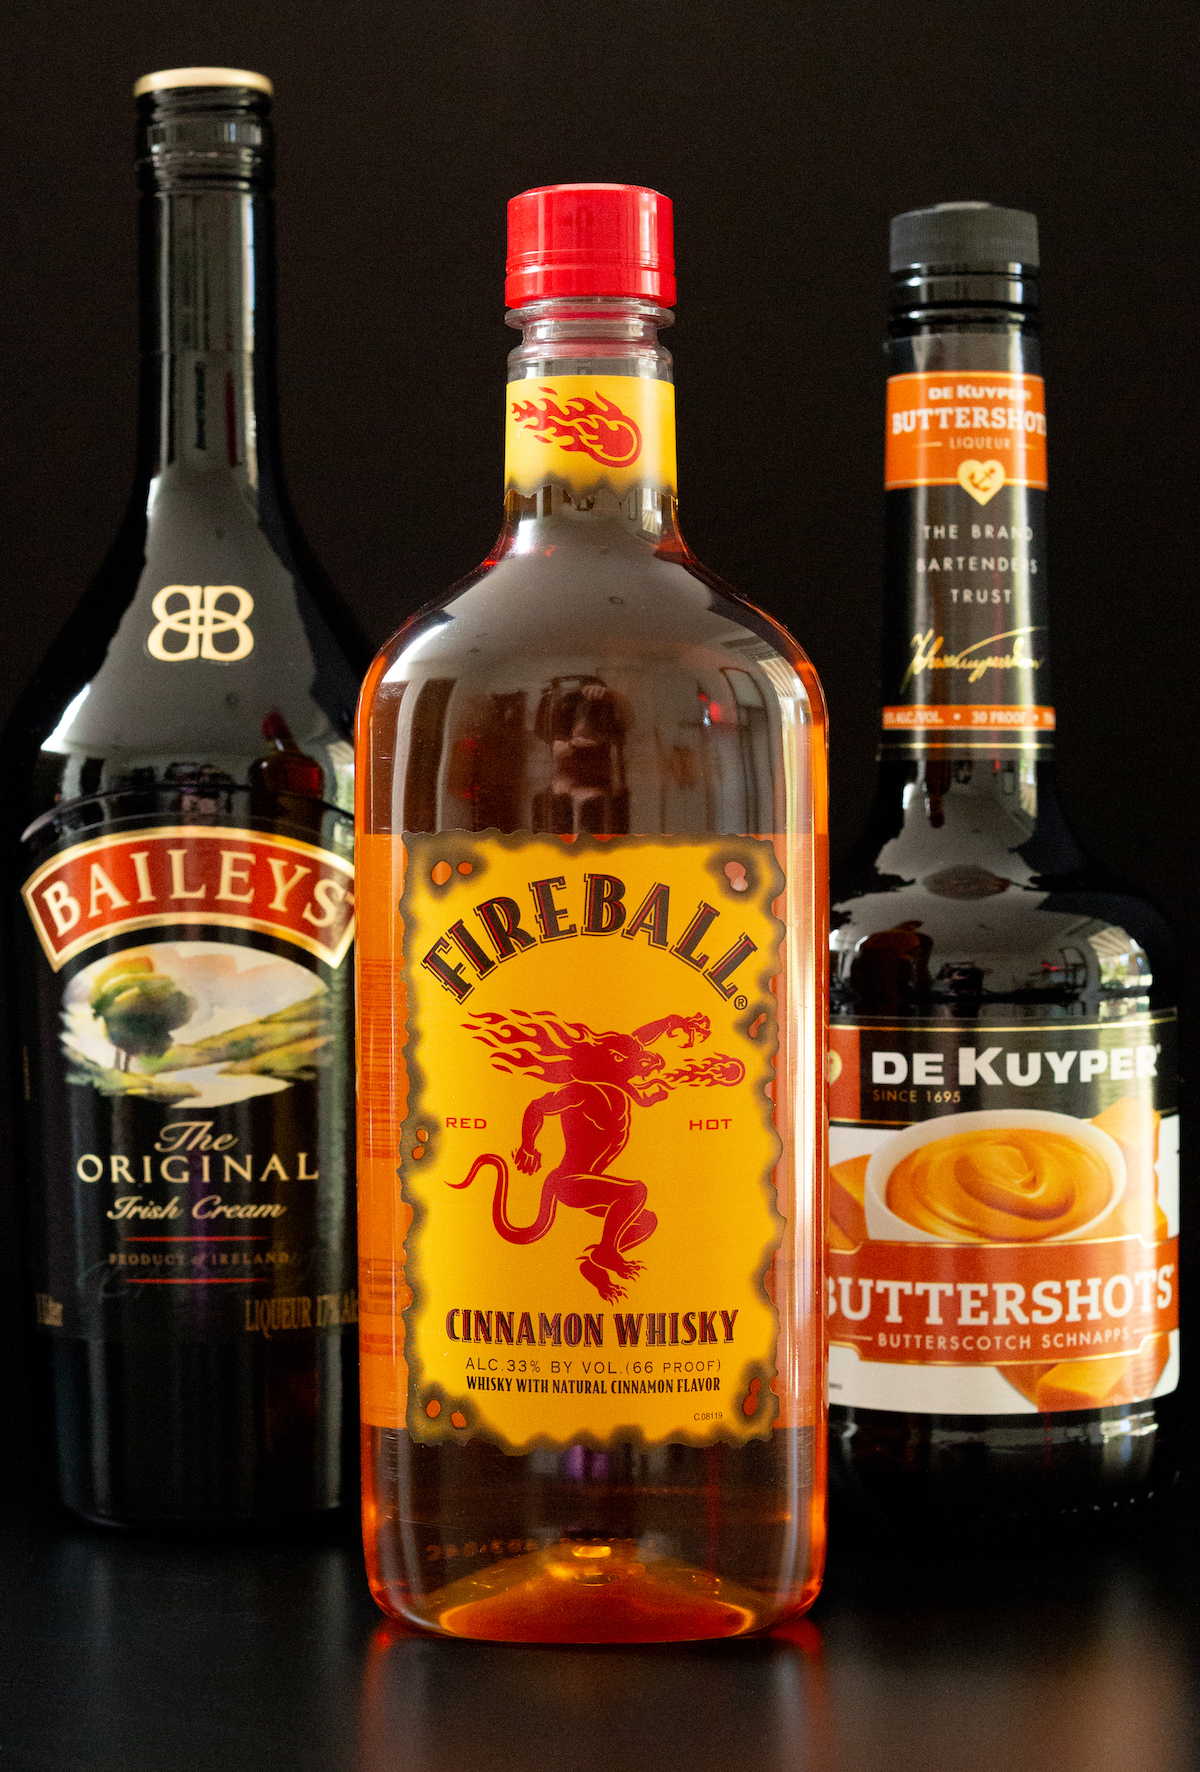 A bottle of Bailey's Irish Cream, Fireball, and Buttershots all on a black background.